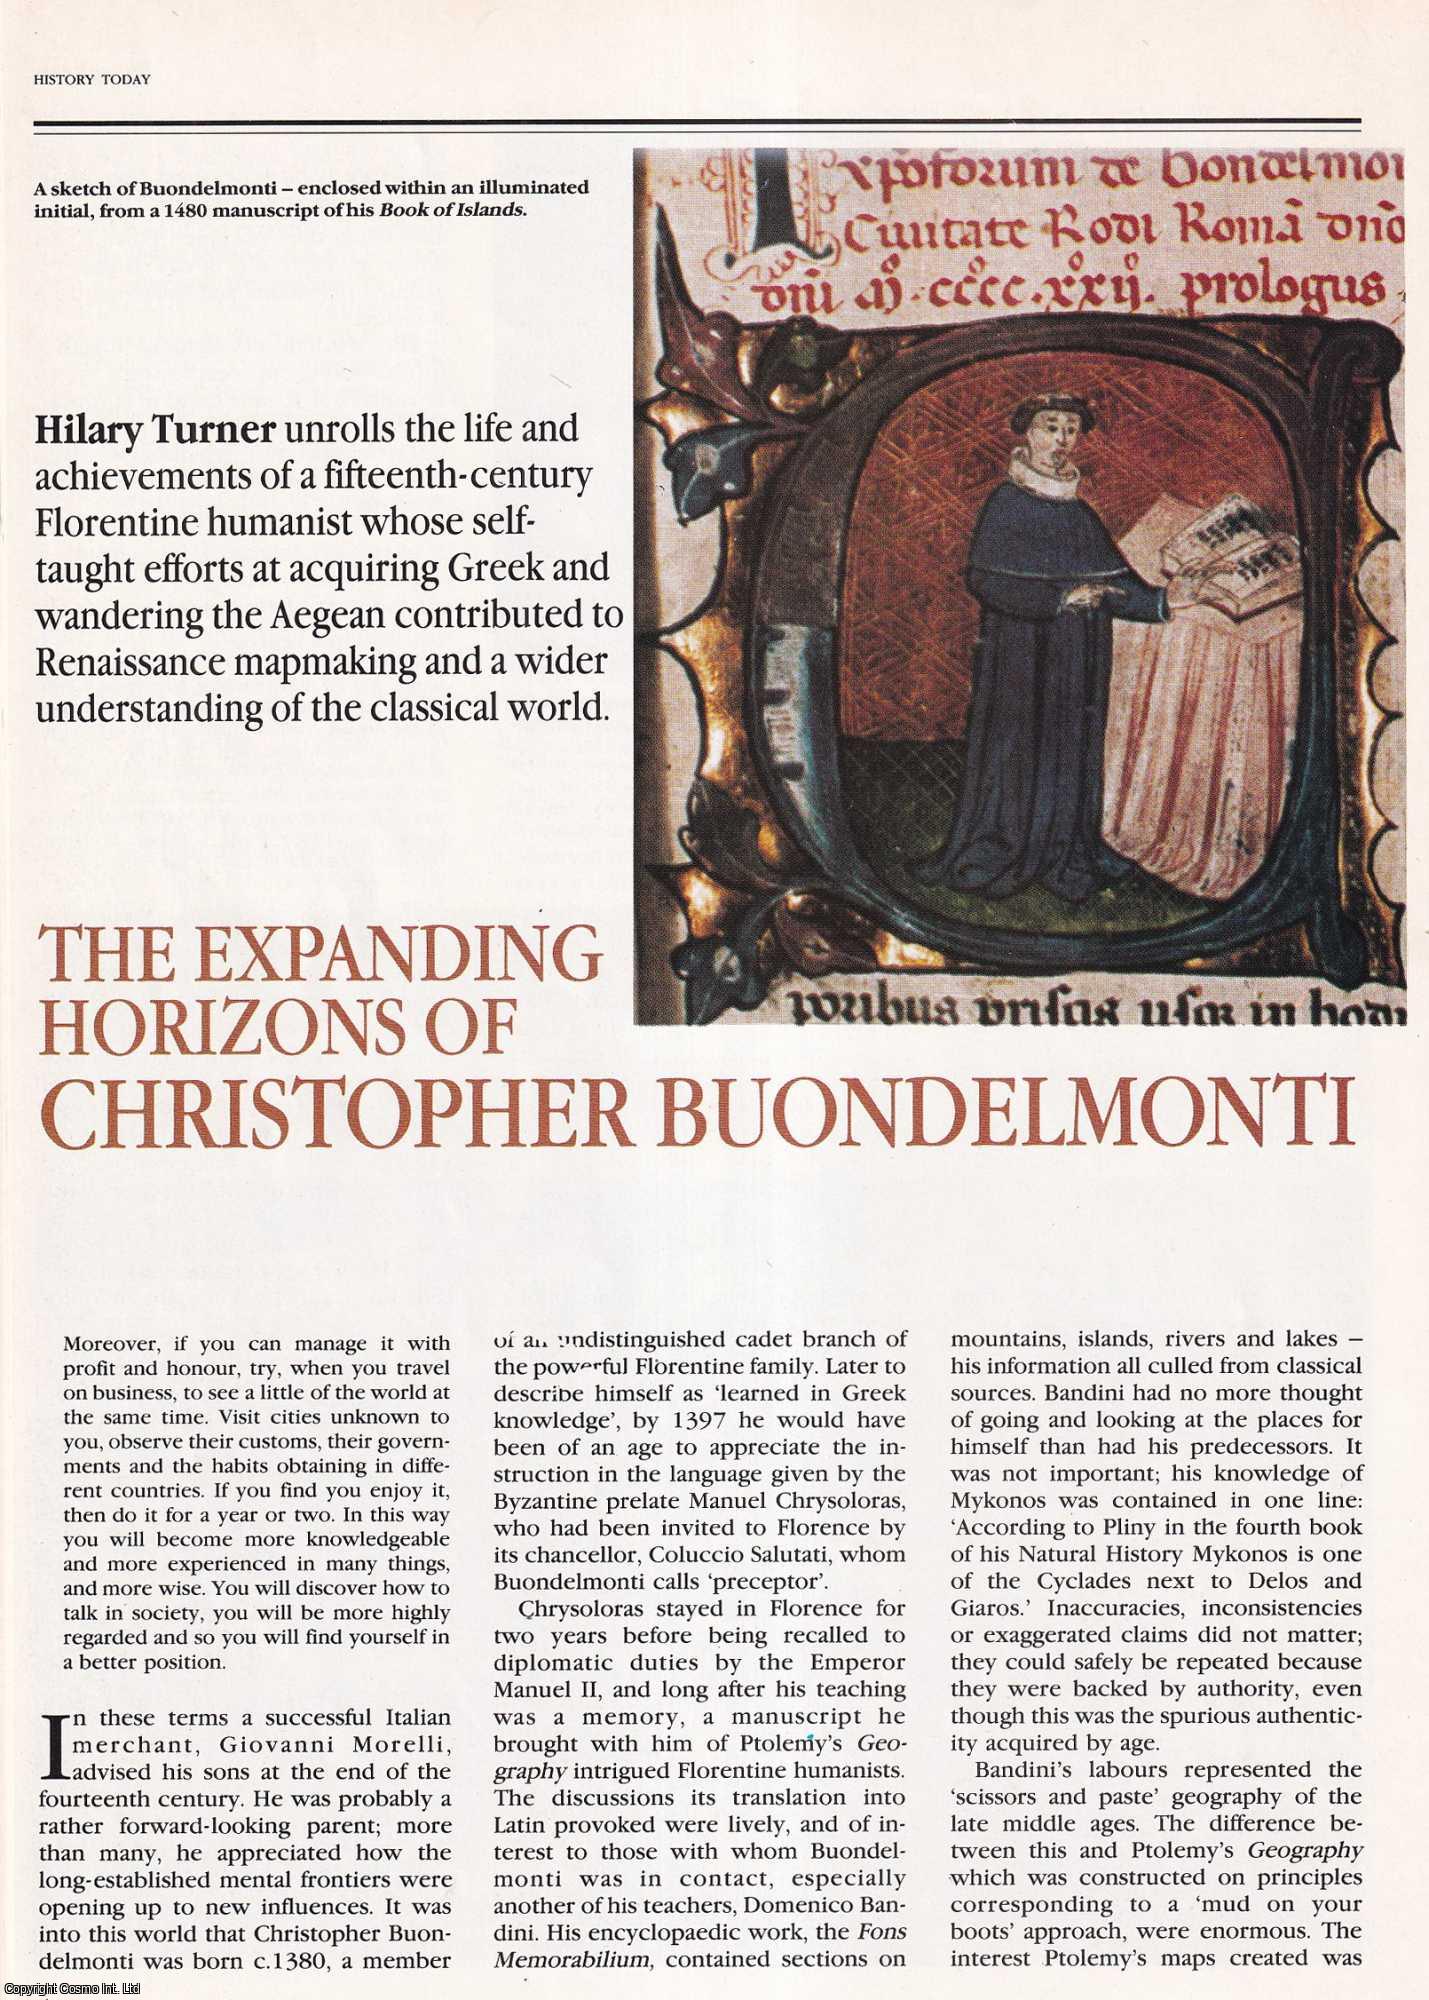 Hilary Turner - The Expanding Horizons of Christopher Buondelmonti; Fifteenth-Century Florentine Humanist. An original article from History Today, 1990.